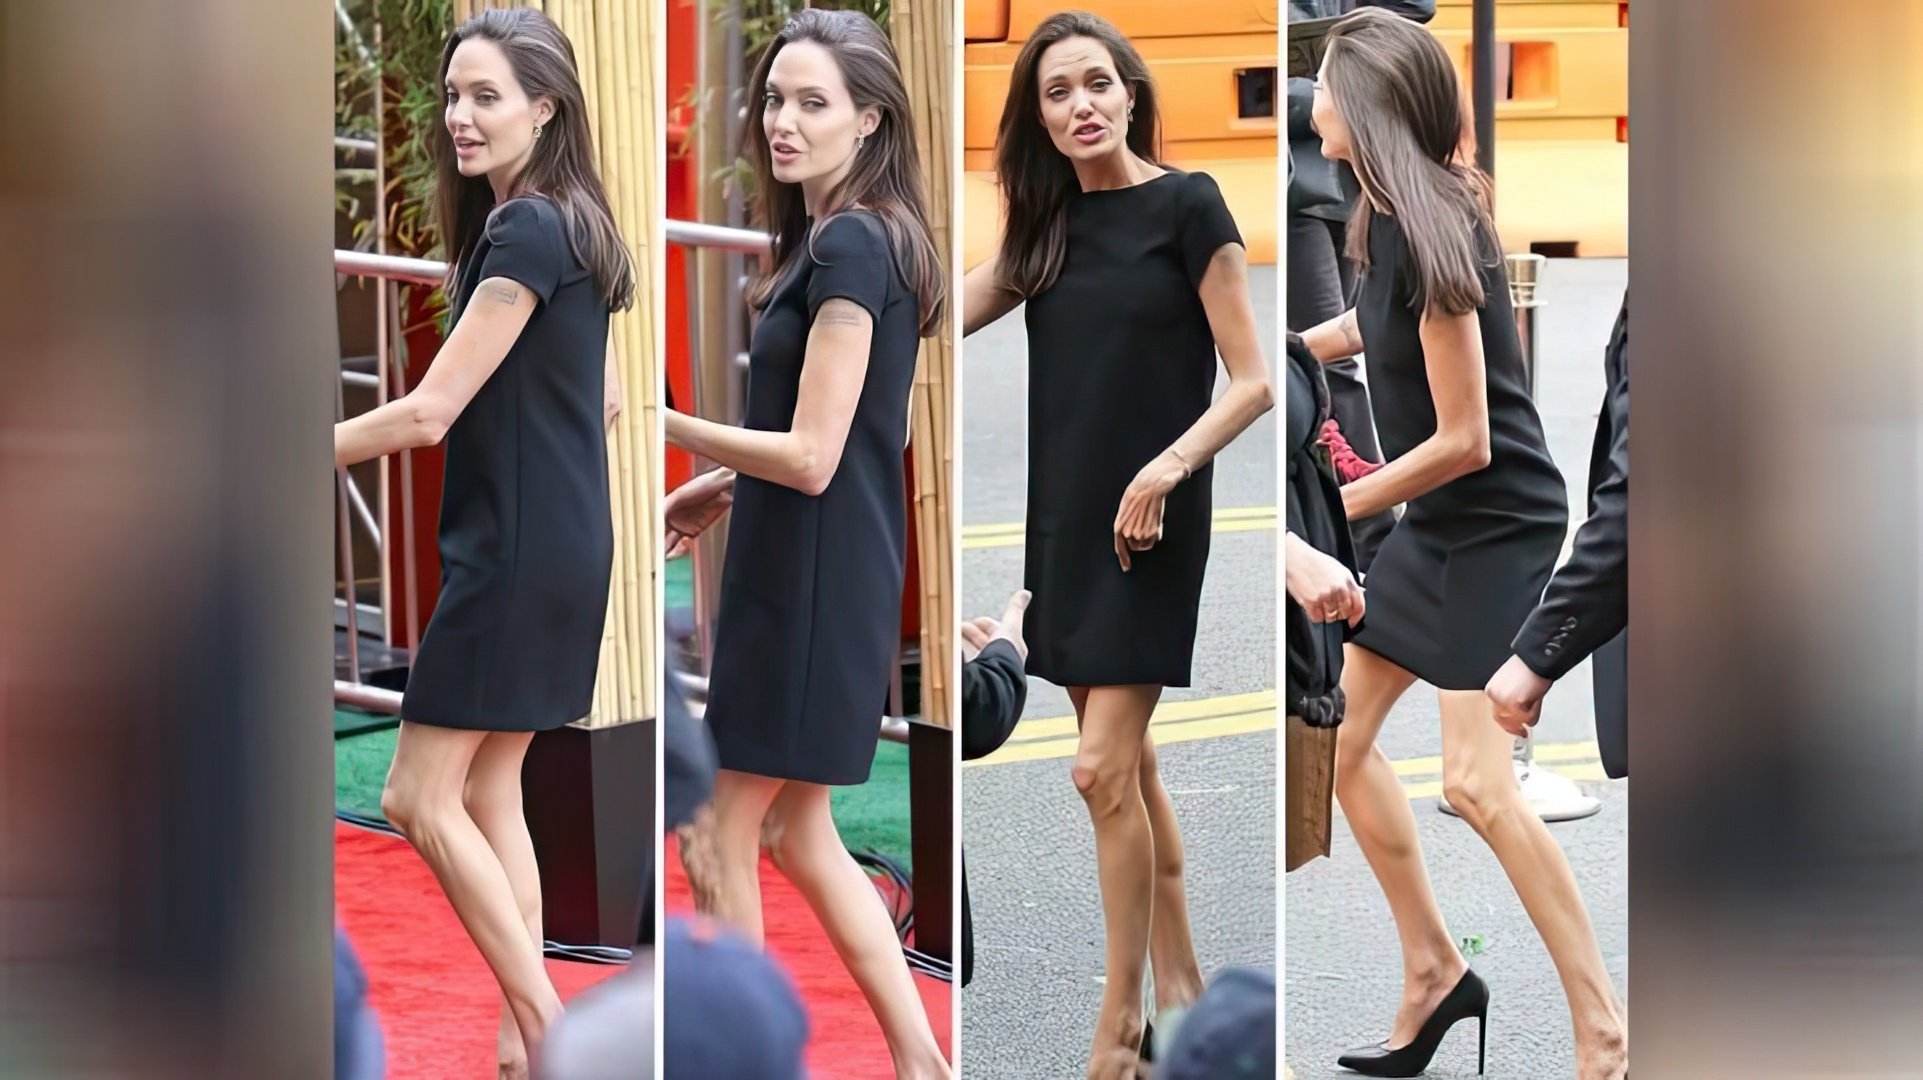 After the divorce, Jolie lost up to 75 lbs due to stress